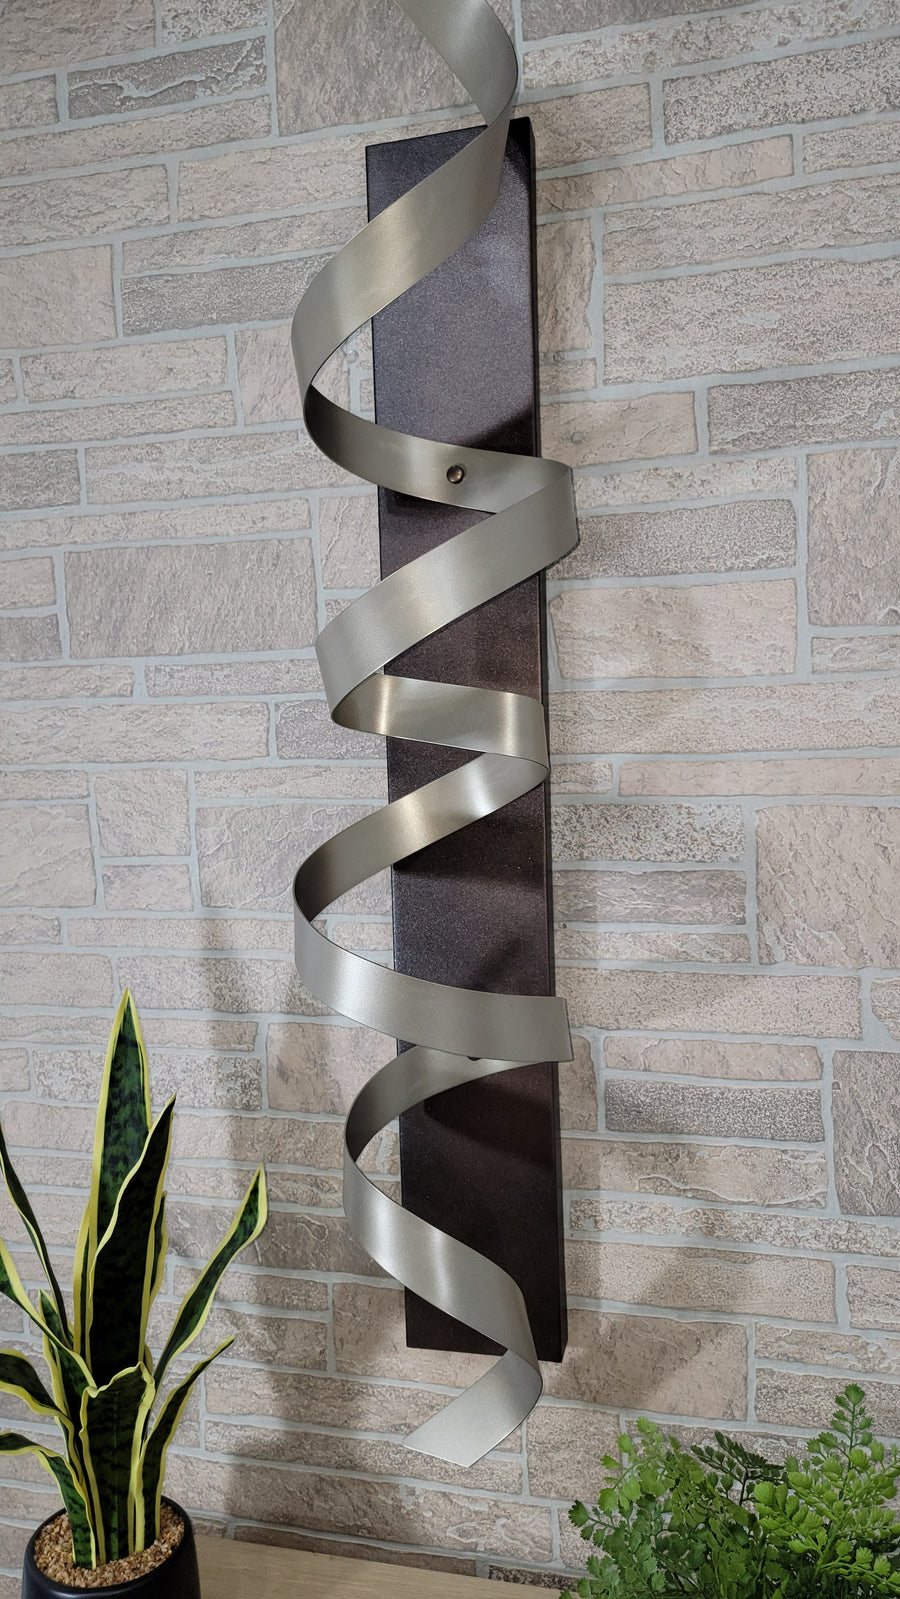 Only One!  Grey  Color" Abstract Metal Sculpture - 49" x 10" x 10" -CHAMPAGNE KNIGHT